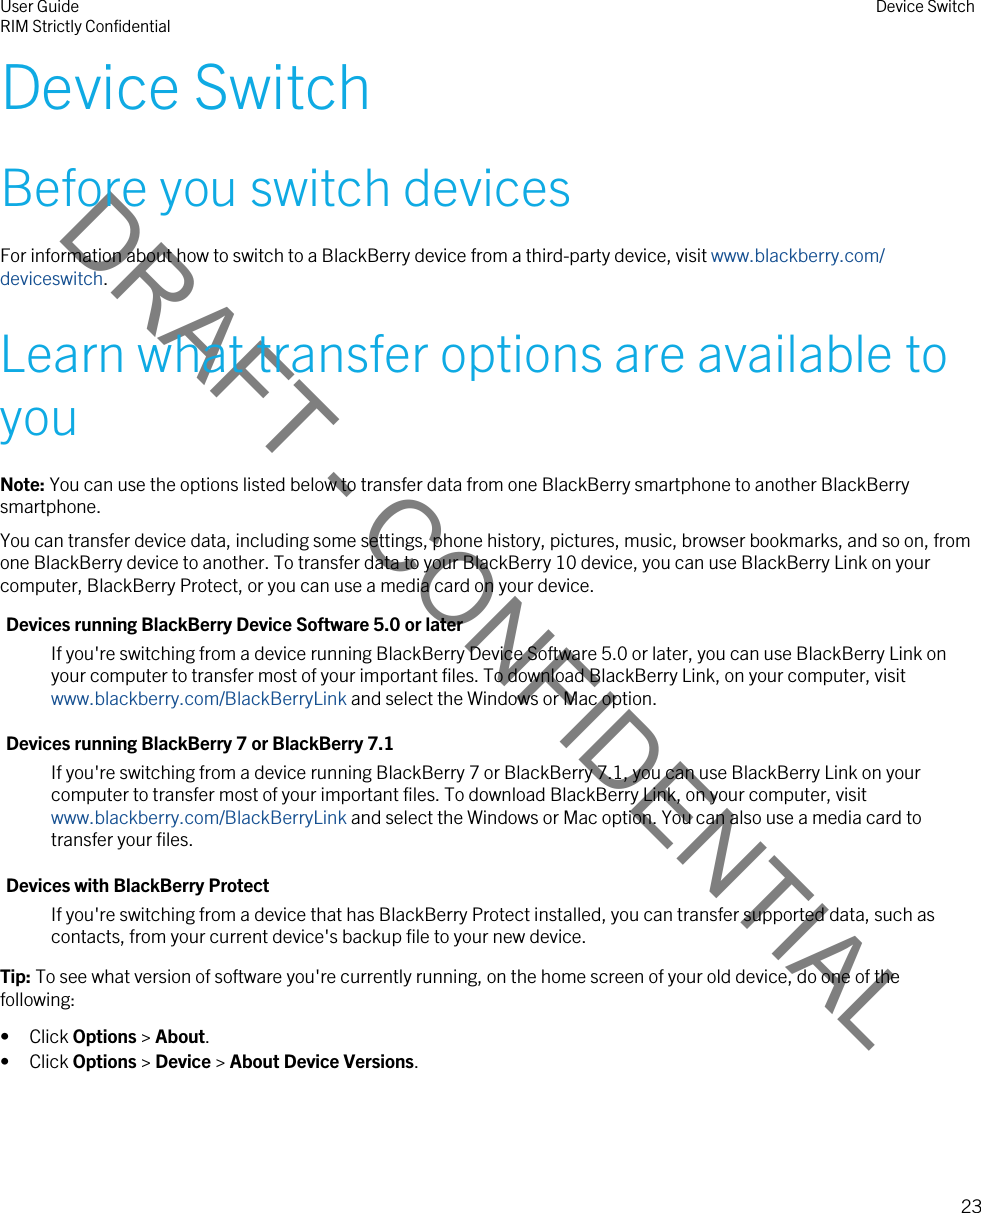 DRAFT - CONFIDENTIALDevice SwitchBefore you switch devicesFor information about how to switch to a BlackBerry device from a third-party device, visit www.blackberry.com/deviceswitch.Learn what transfer options are available to youNote: You can use the options listed below to transfer data from one BlackBerry smartphone to another BlackBerry smartphone.You can transfer device data, including some settings, phone history, pictures, music, browser bookmarks, and so on, from one BlackBerry device to another. To transfer data to your BlackBerry 10 device, you can use BlackBerry Link on your computer, BlackBerry Protect, or you can use a media card on your device.Devices running BlackBerry Device Software 5.0 or laterIf you&apos;re switching from a device running BlackBerry Device Software 5.0 or later, you can use BlackBerry Link on your computer to transfer most of your important files. To download BlackBerry Link, on your computer, visit www.blackberry.com/BlackBerryLink and select the Windows or Mac option.Devices running BlackBerry 7 or BlackBerry 7.1If you&apos;re switching from a device running BlackBerry 7 or BlackBerry 7.1, you can use BlackBerry Link on your computer to transfer most of your important files. To download BlackBerry Link, on your computer, visit www.blackberry.com/BlackBerryLink and select the Windows or Mac option. You can also use a media card to transfer your files.Devices with BlackBerry ProtectIf you&apos;re switching from a device that has BlackBerry Protect installed, you can transfer supported data, such as contacts, from your current device&apos;s backup file to your new device.Tip: To see what version of software you&apos;re currently running, on the home screen of your old device, do one of the following:• Click Options &gt; About.• Click Options &gt; Device &gt; About Device Versions.User GuideRIM Strictly Confidential Device Switch23 